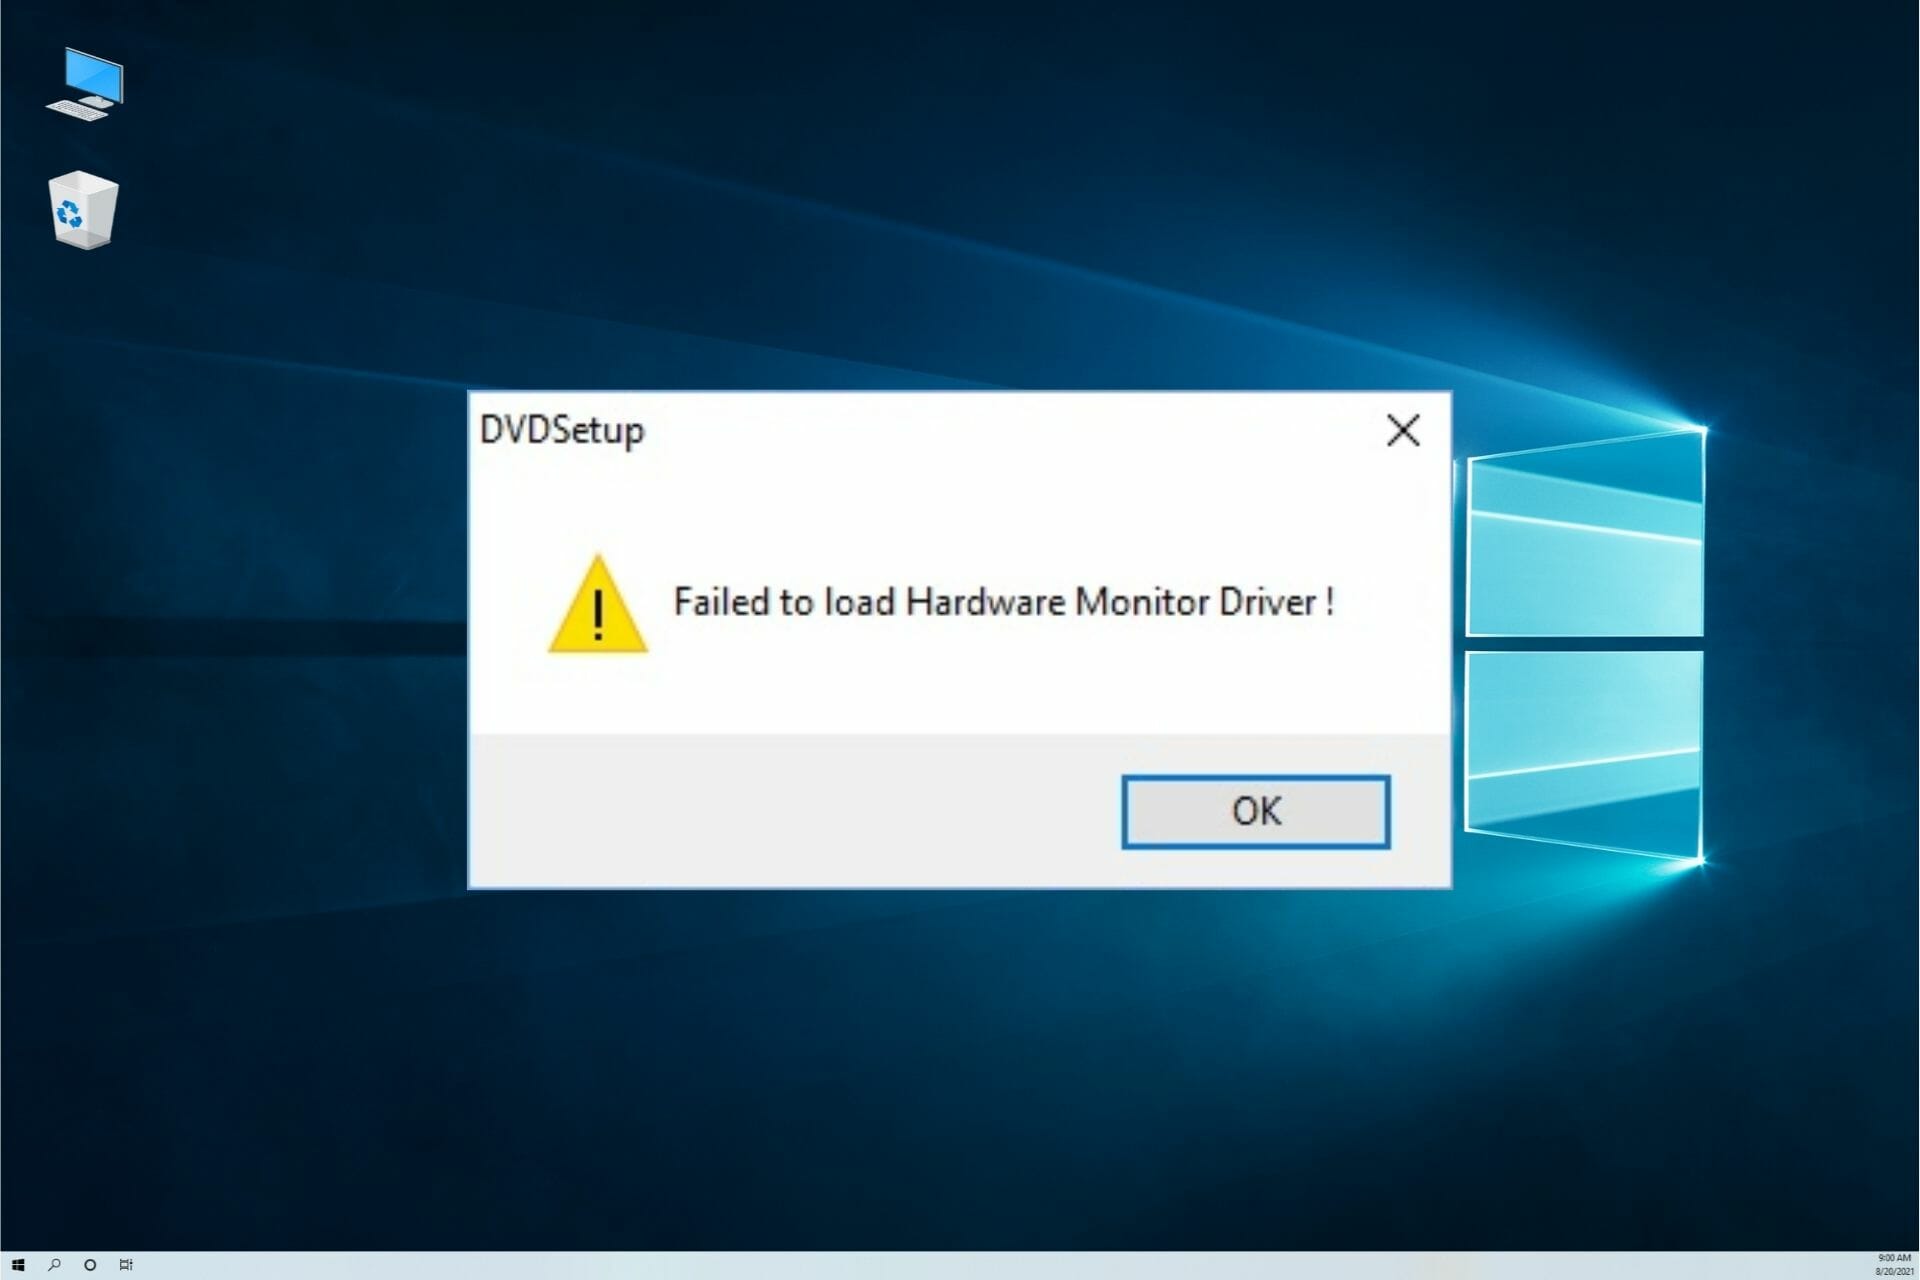 hardware monitor driver failed to load